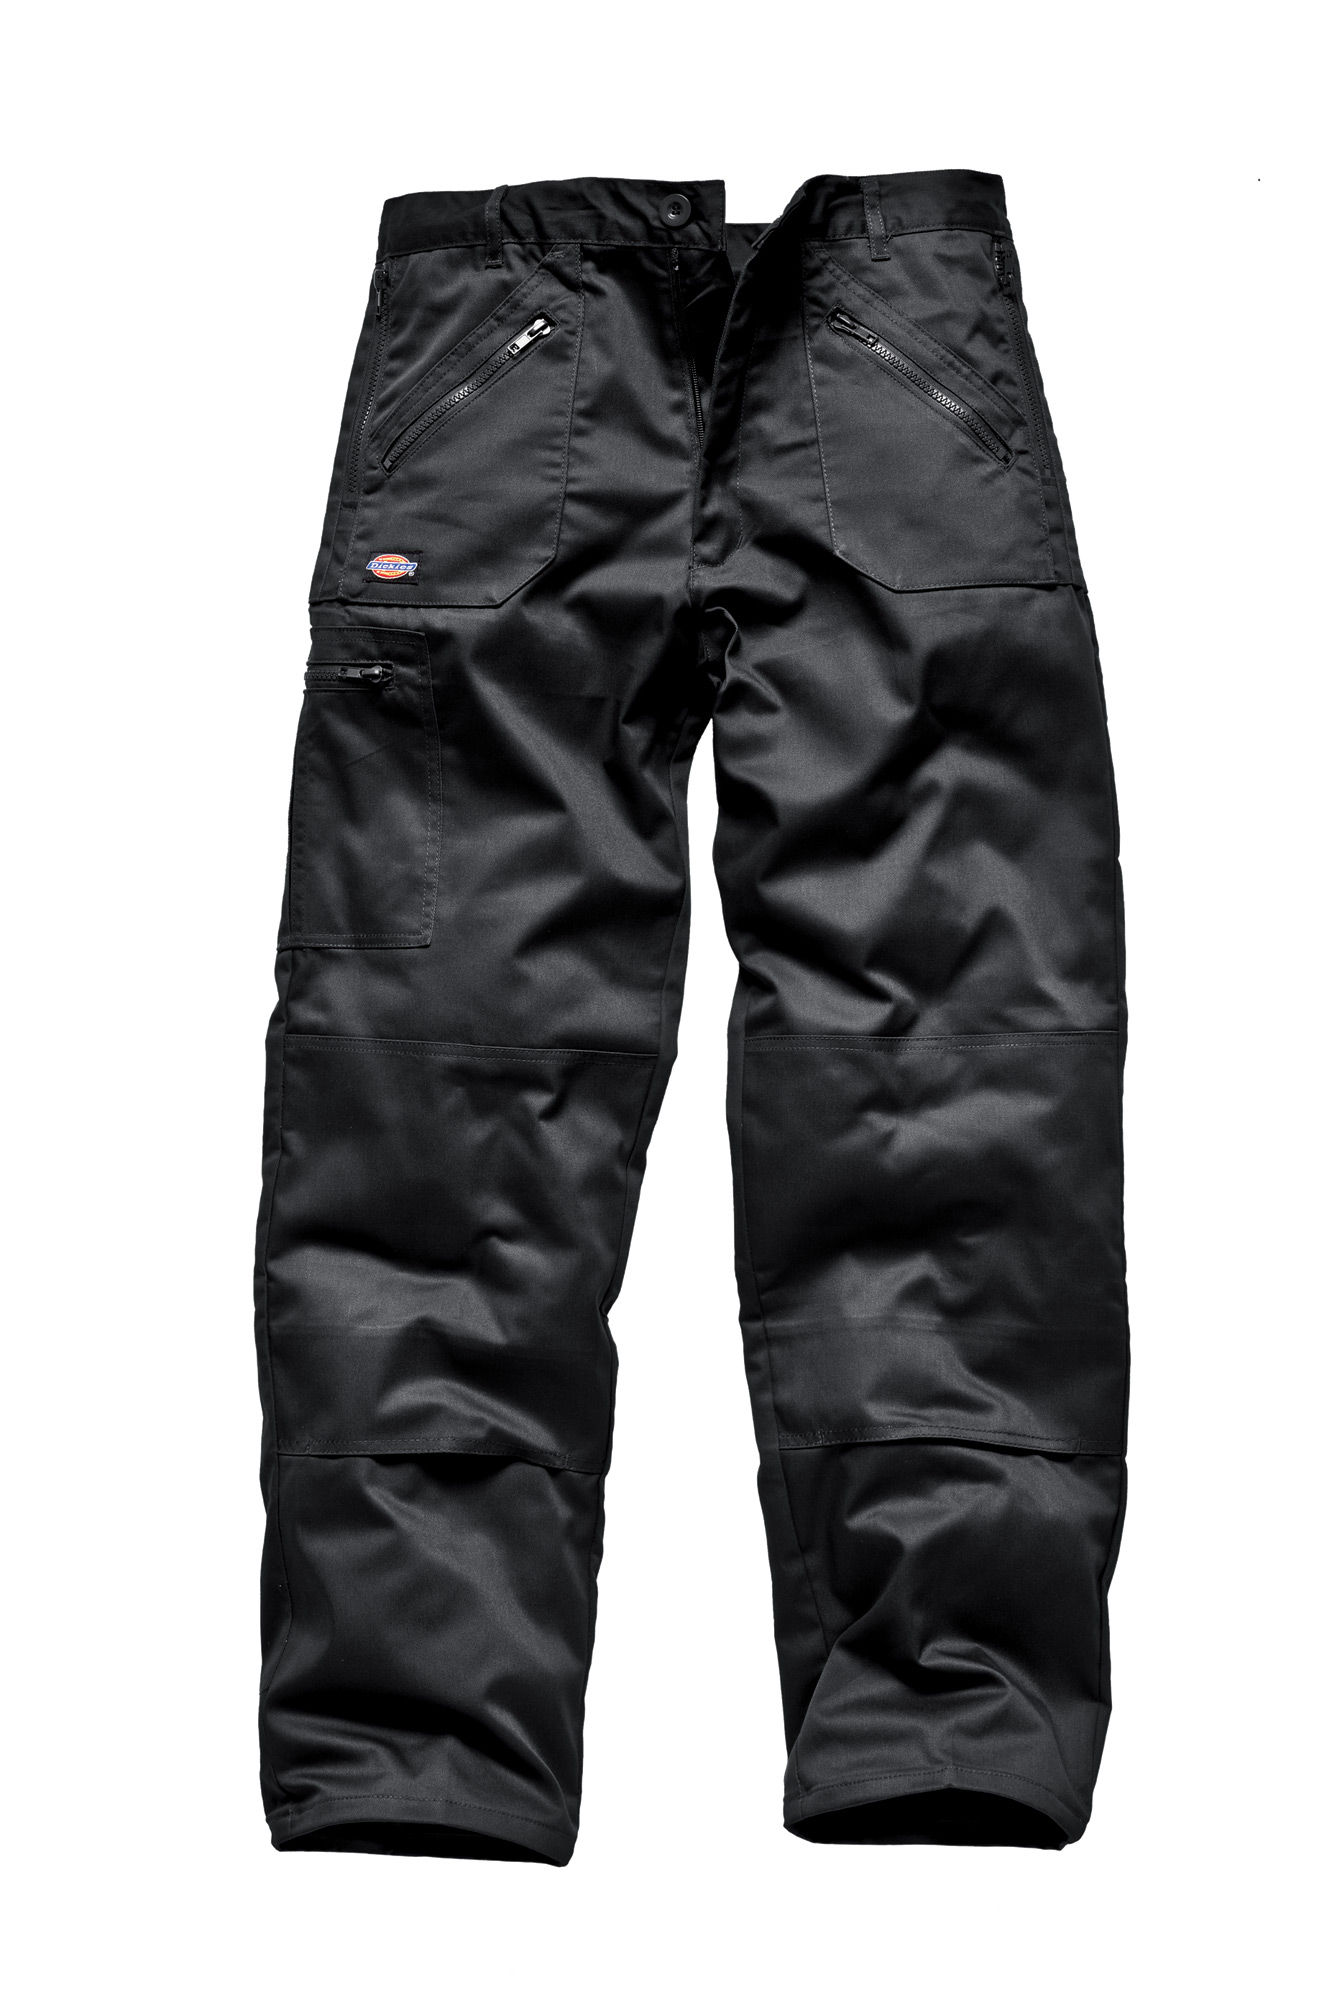 Dickies Redhawk Action Trousers - WD814